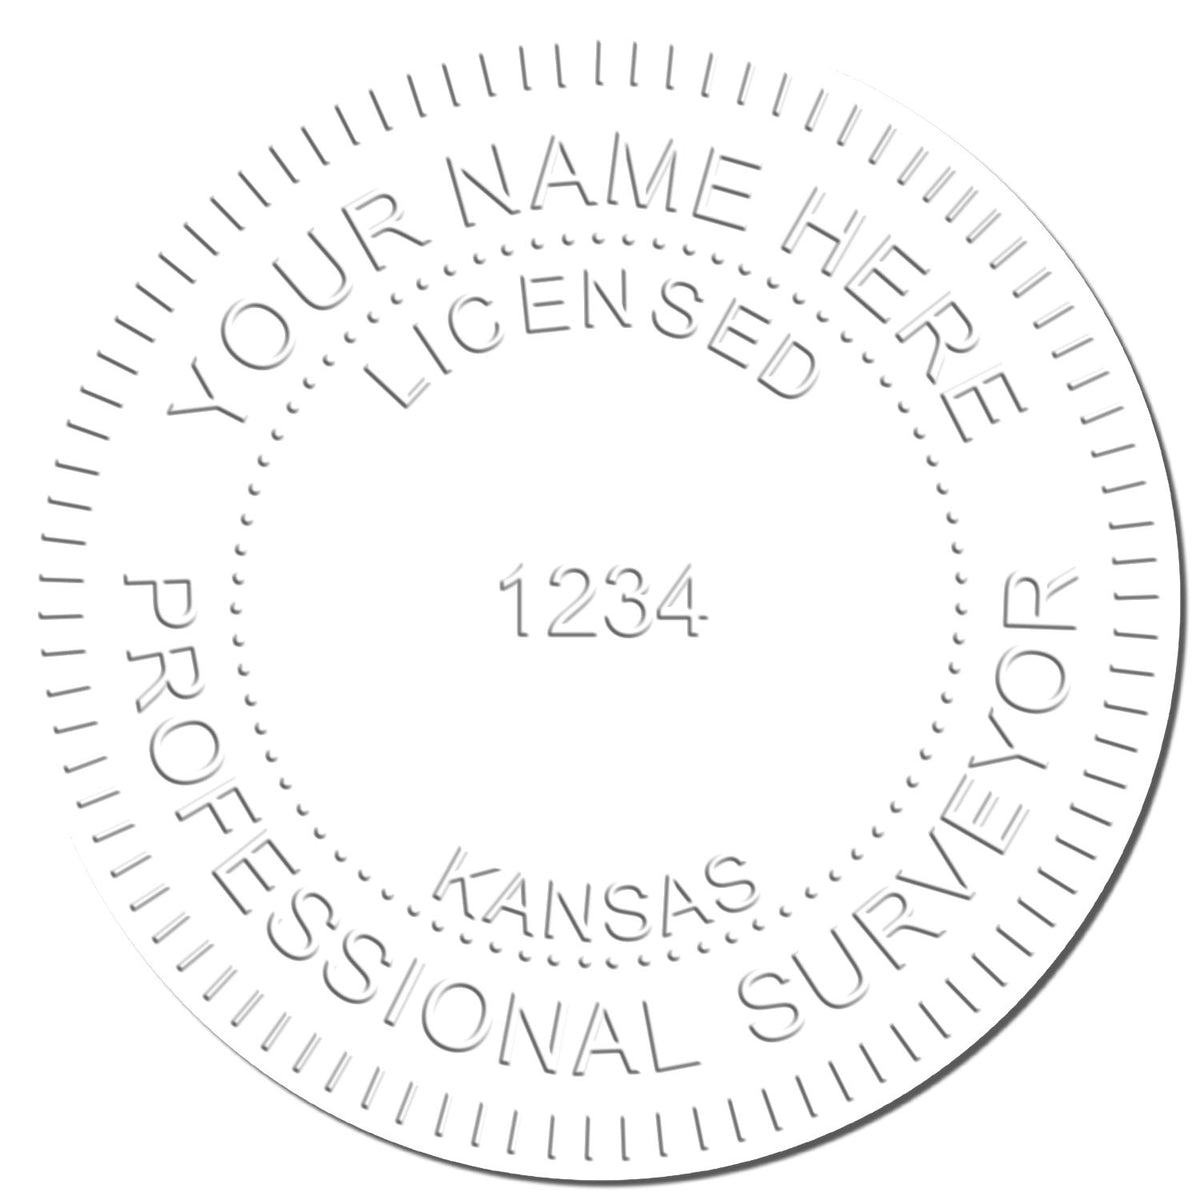 This paper is stamped with a sample imprint of the State of Kansas Soft Land Surveyor Embossing Seal, signifying its quality and reliability.